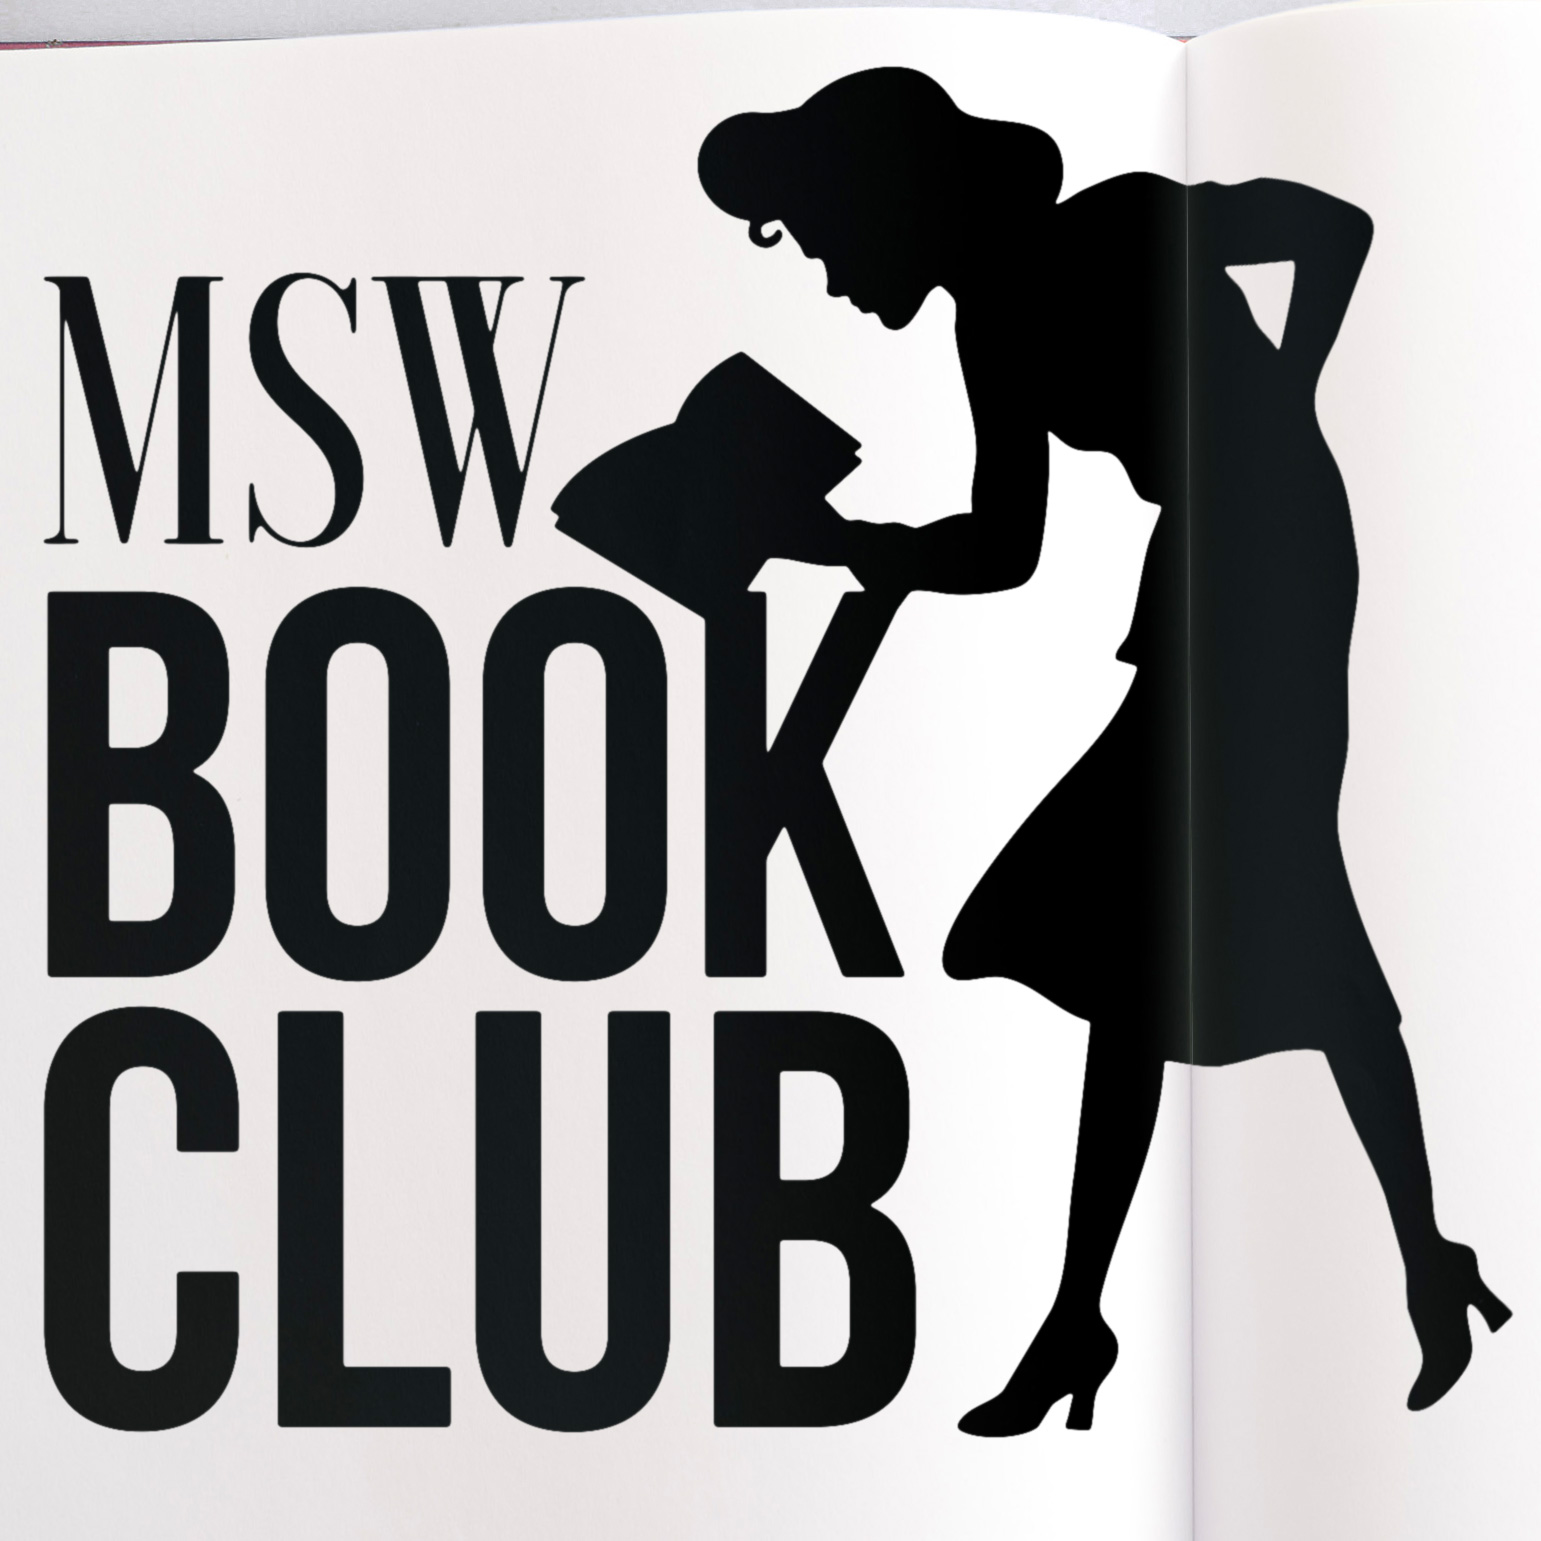 MSW Book Club Podcast Cover - Square